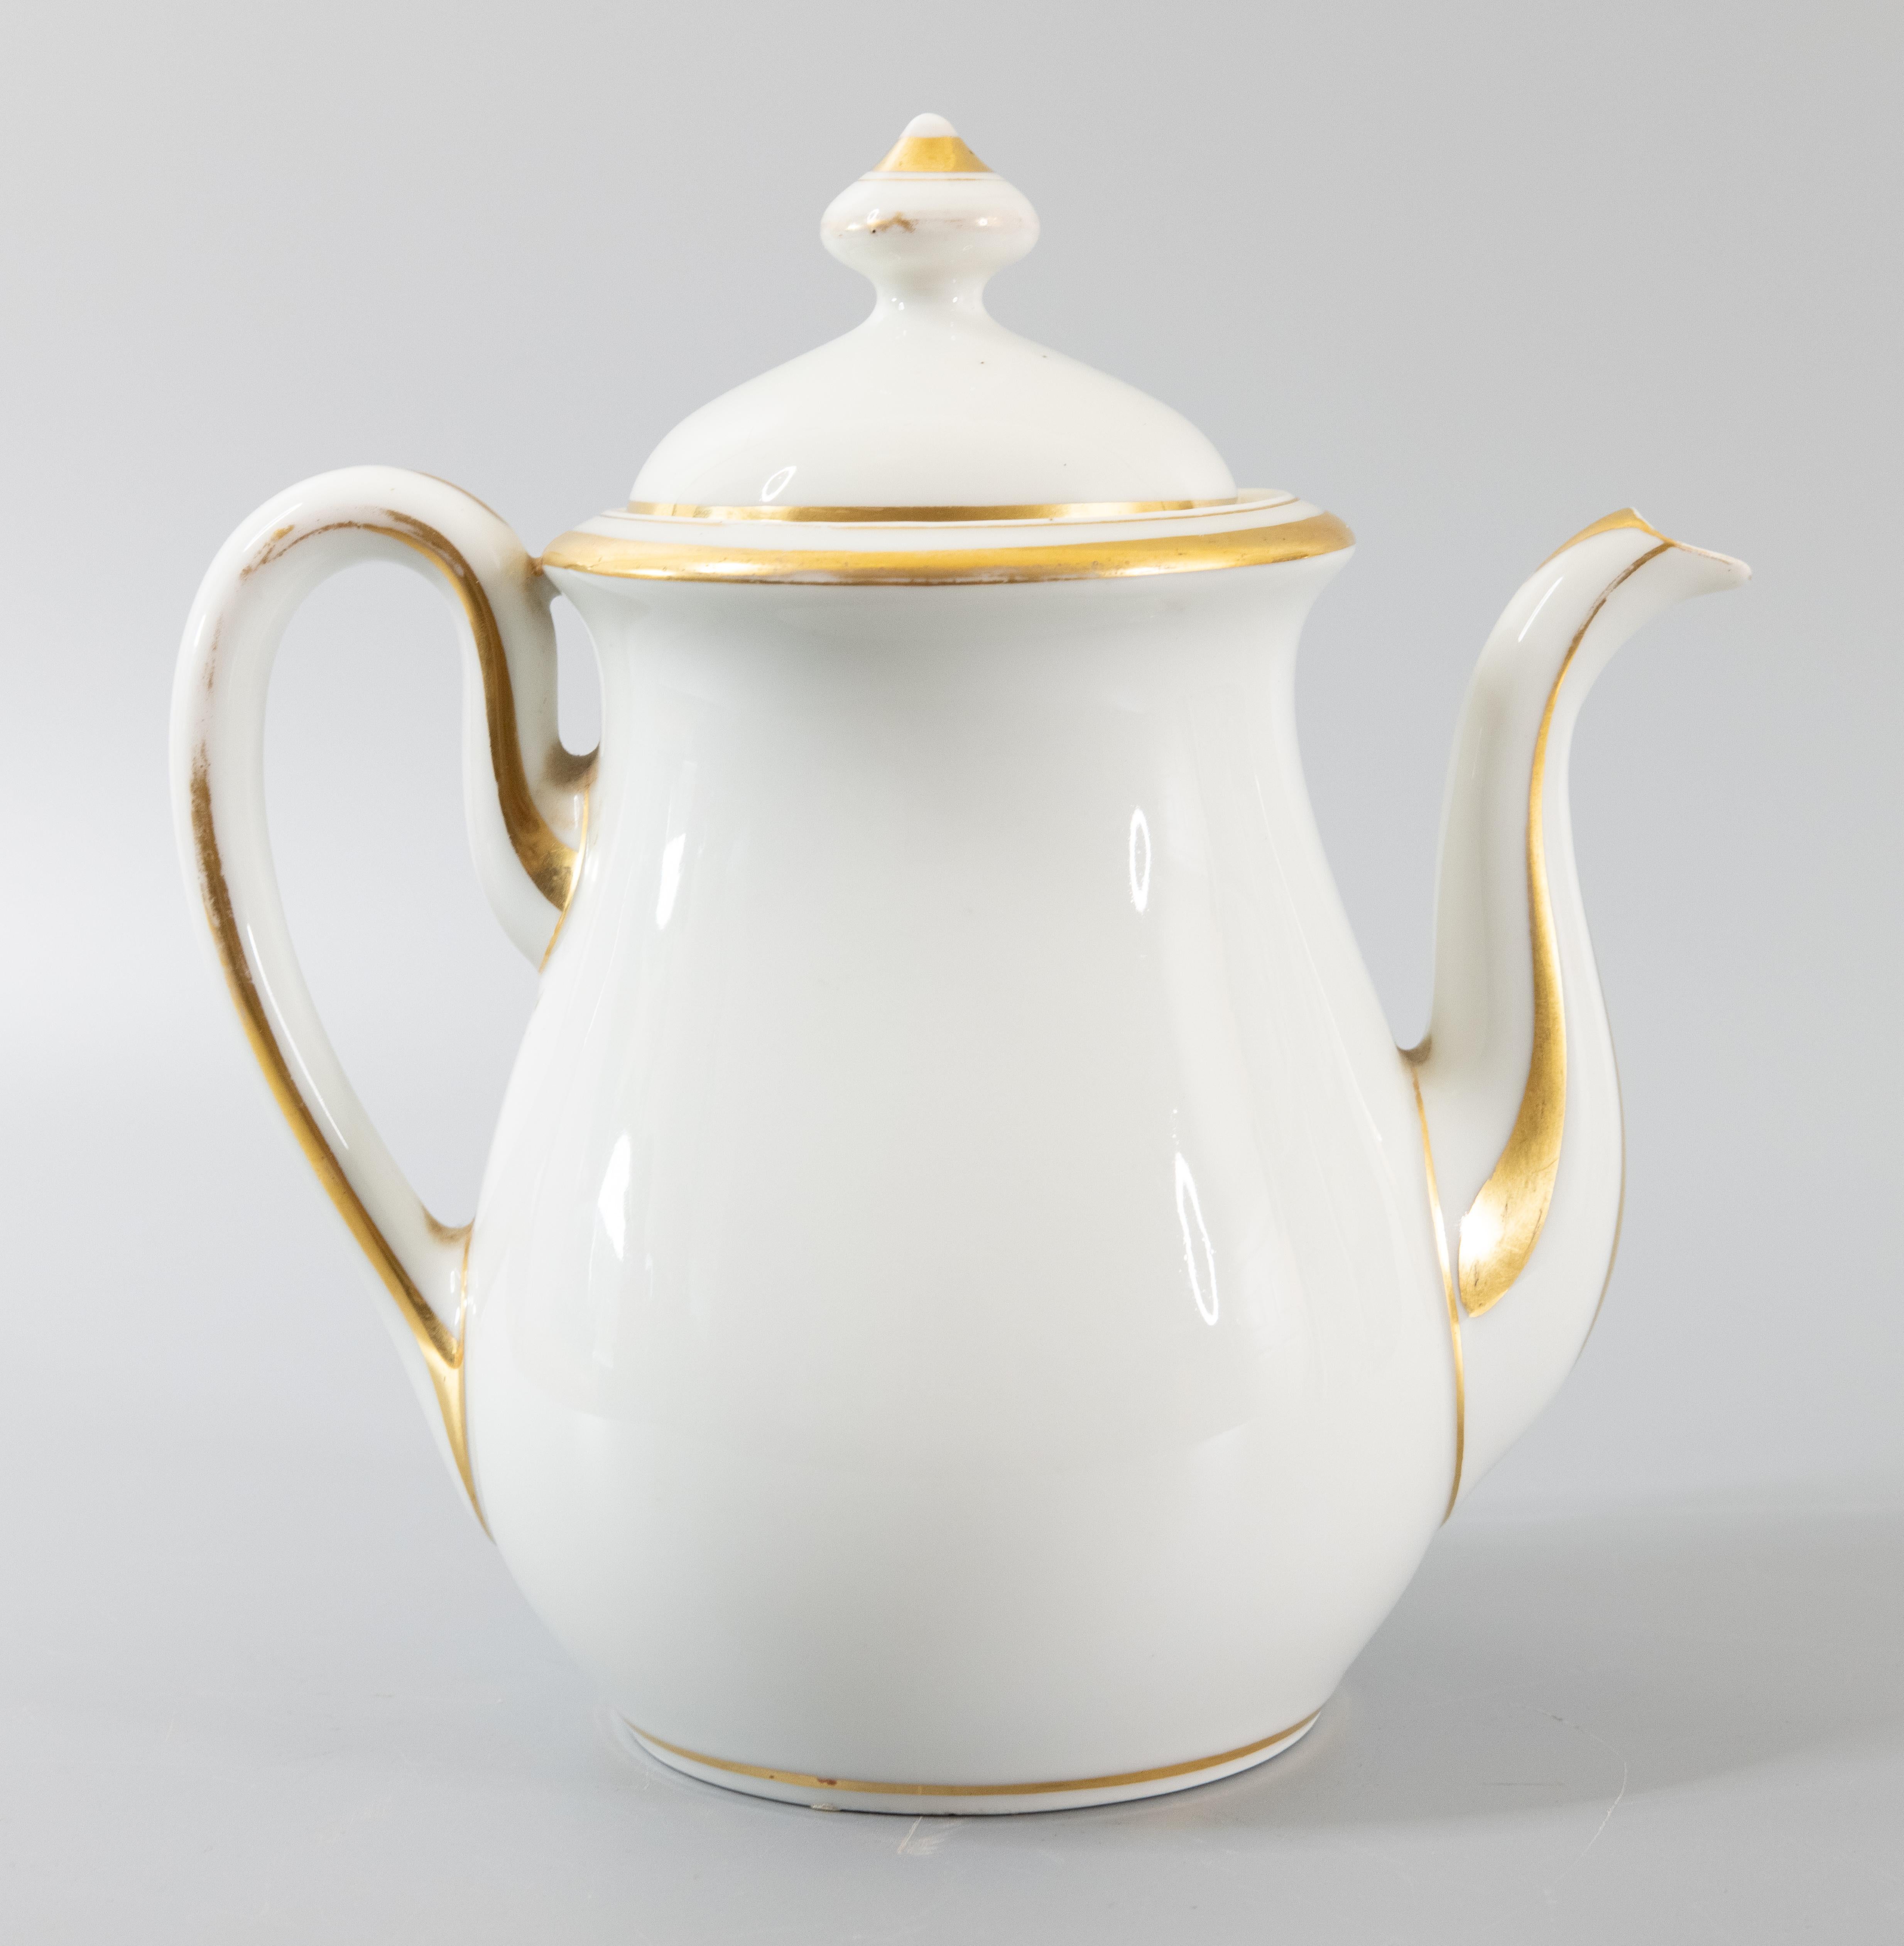 A superb antique 19th Century French Old Paris, also referred to as Vieux Paris, creamware porcelain lidded tea pot or coffee pot with gilt accents and a letter of provenance. It would be lovely added to a collection or displayed on a shelf or